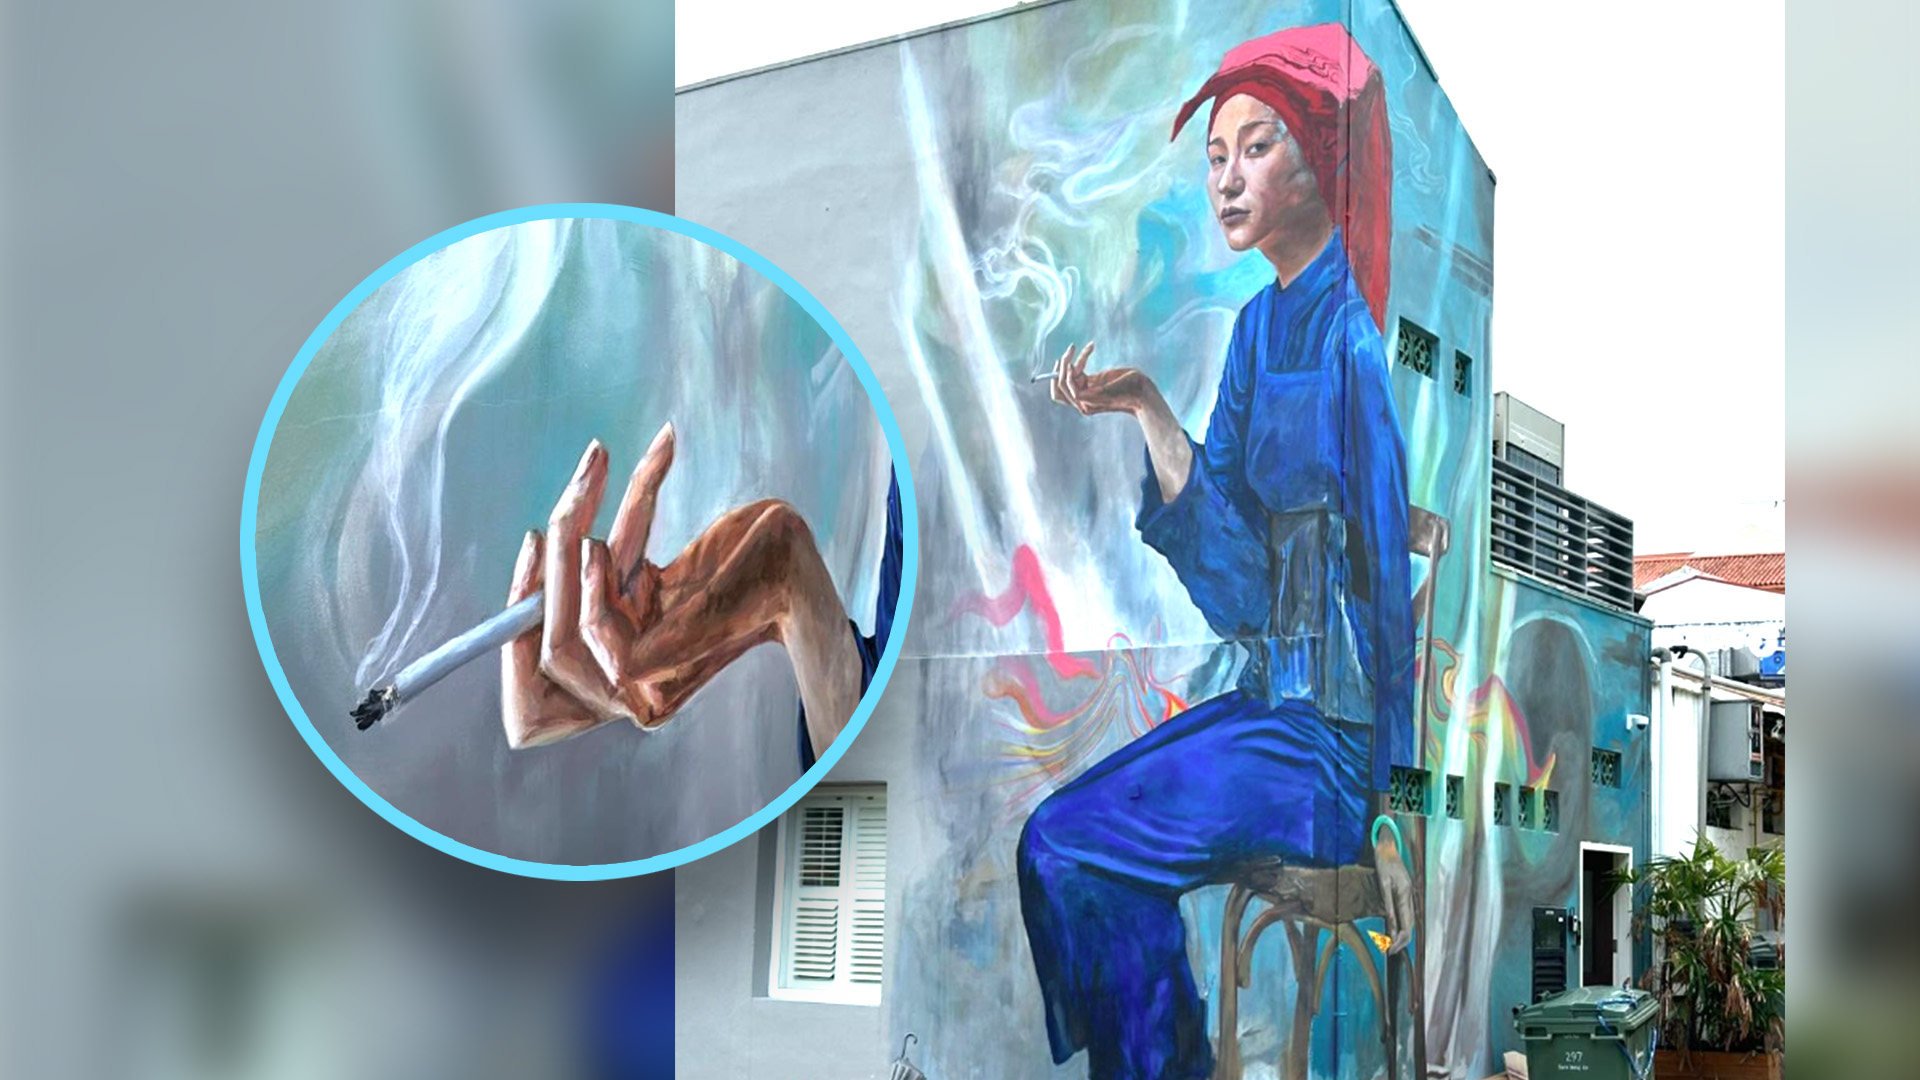 A row over the censorship of street art is raging in Singapore after the city’s authorities ordered the erasure of a smoking cigarette from a Chinatown mural. Photo: SCMP composite/ Instagram/@seanpdunston